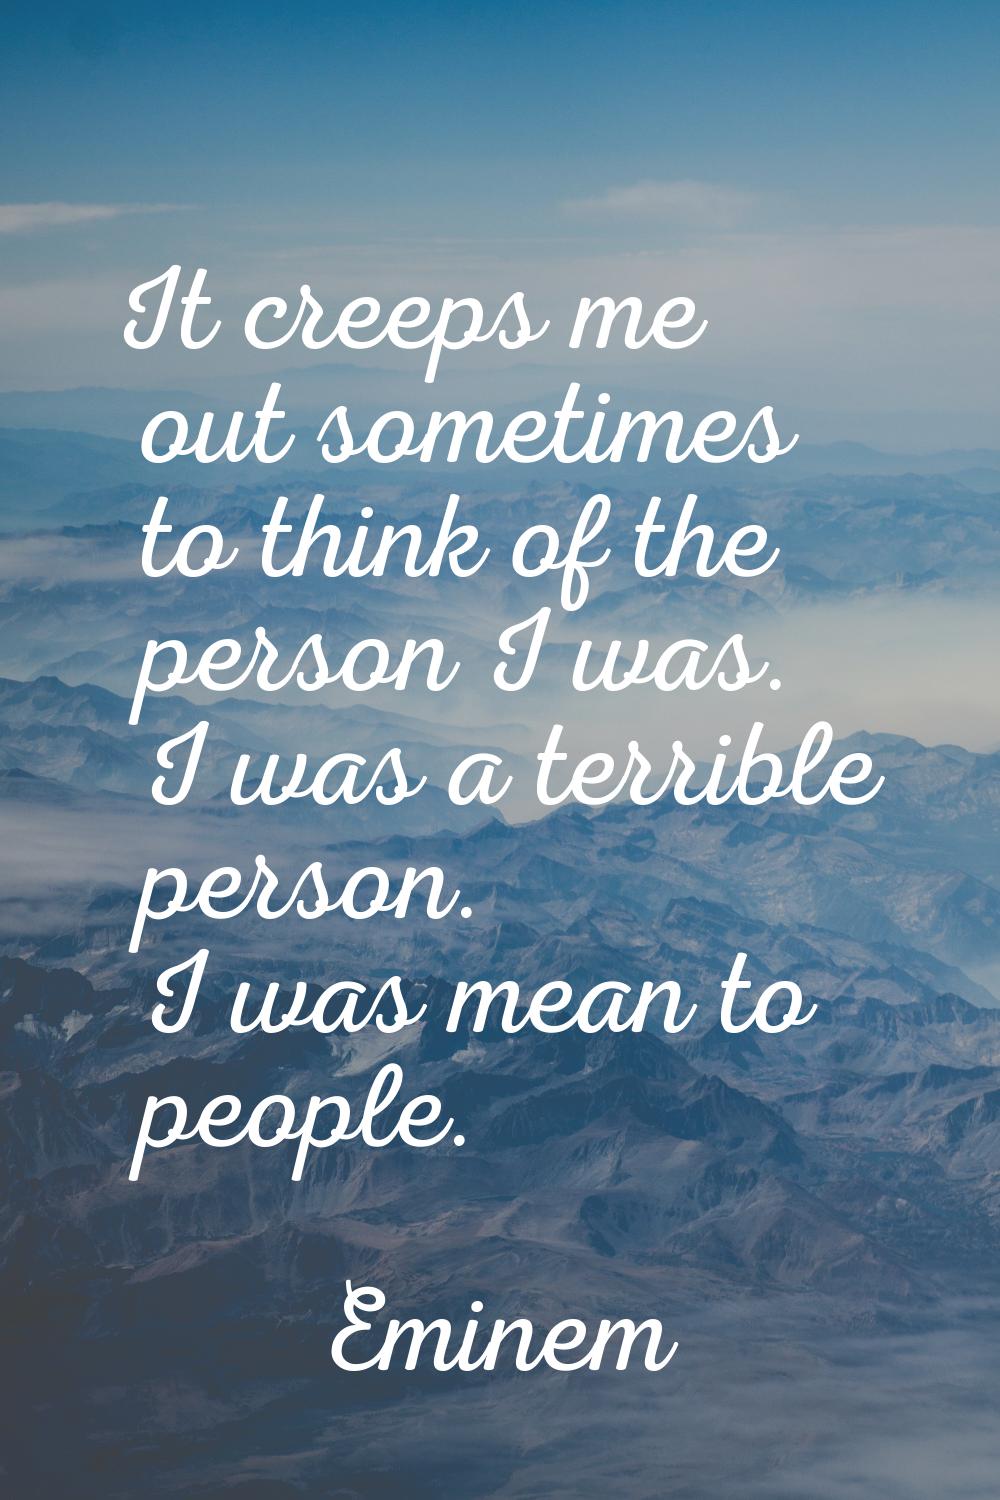 It creeps me out sometimes to think of the person I was. I was a terrible person. I was mean to peo